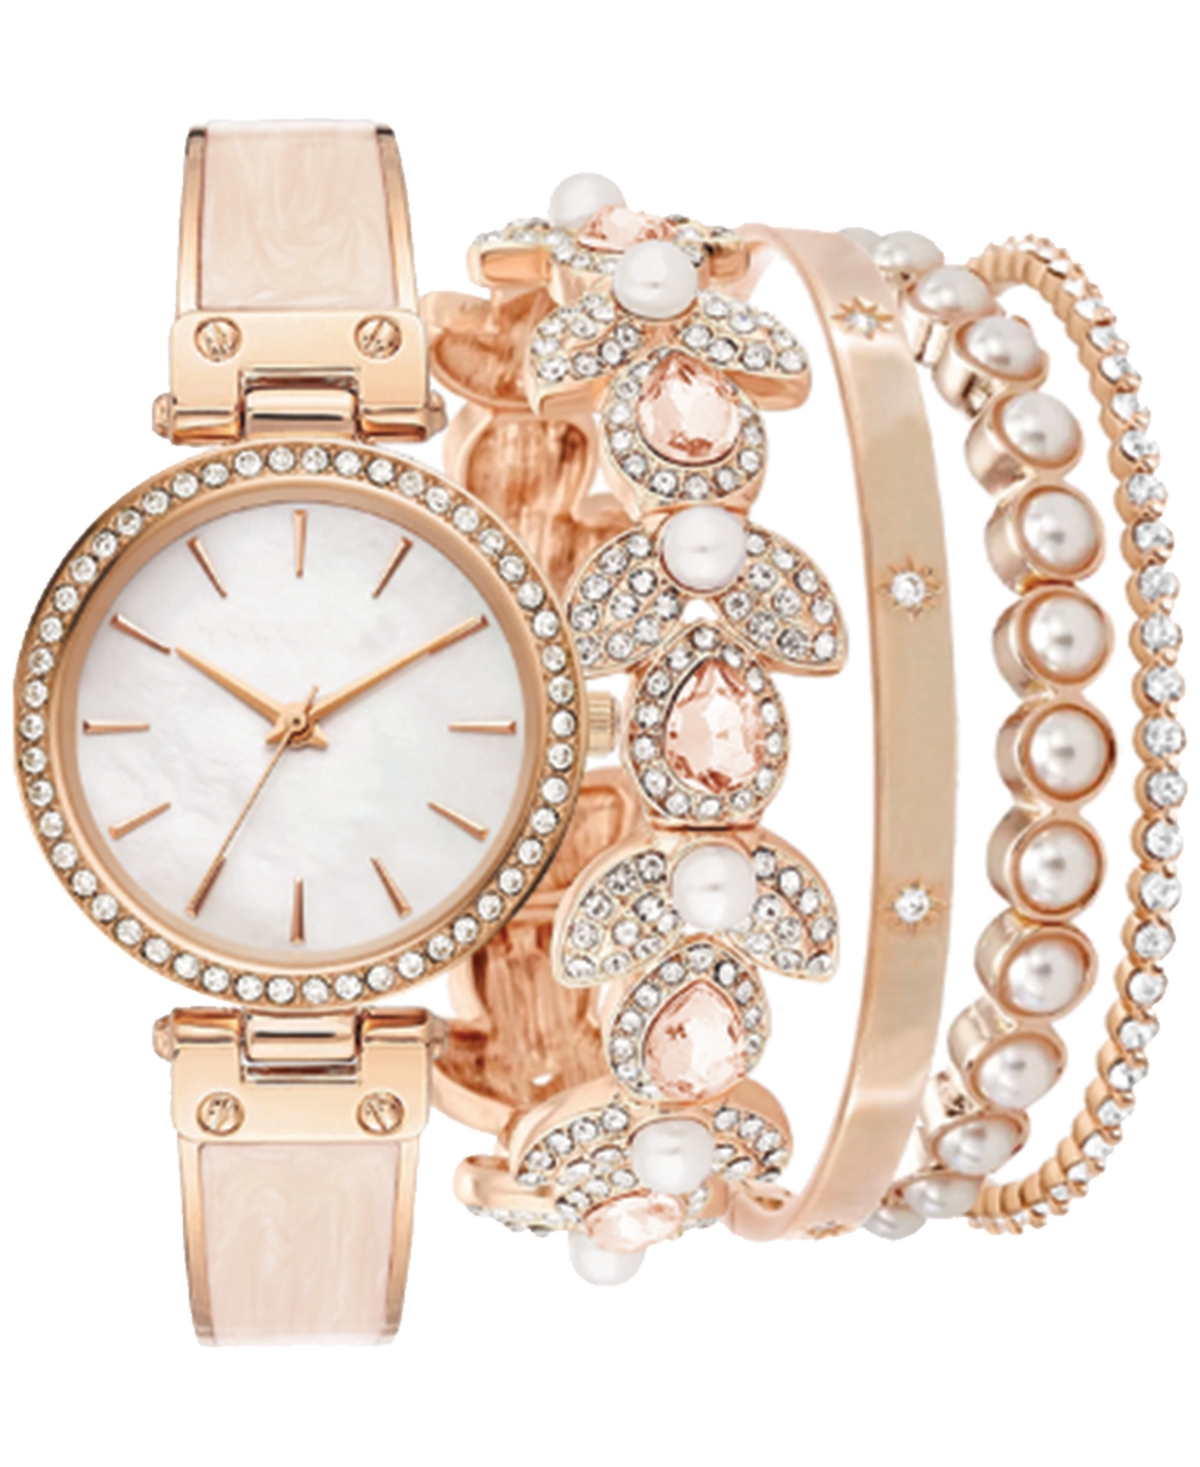 Jessica Carlyle Women's Rose Gold-Tone Metal Alloy Bracelet Watch 34mm Gift Set